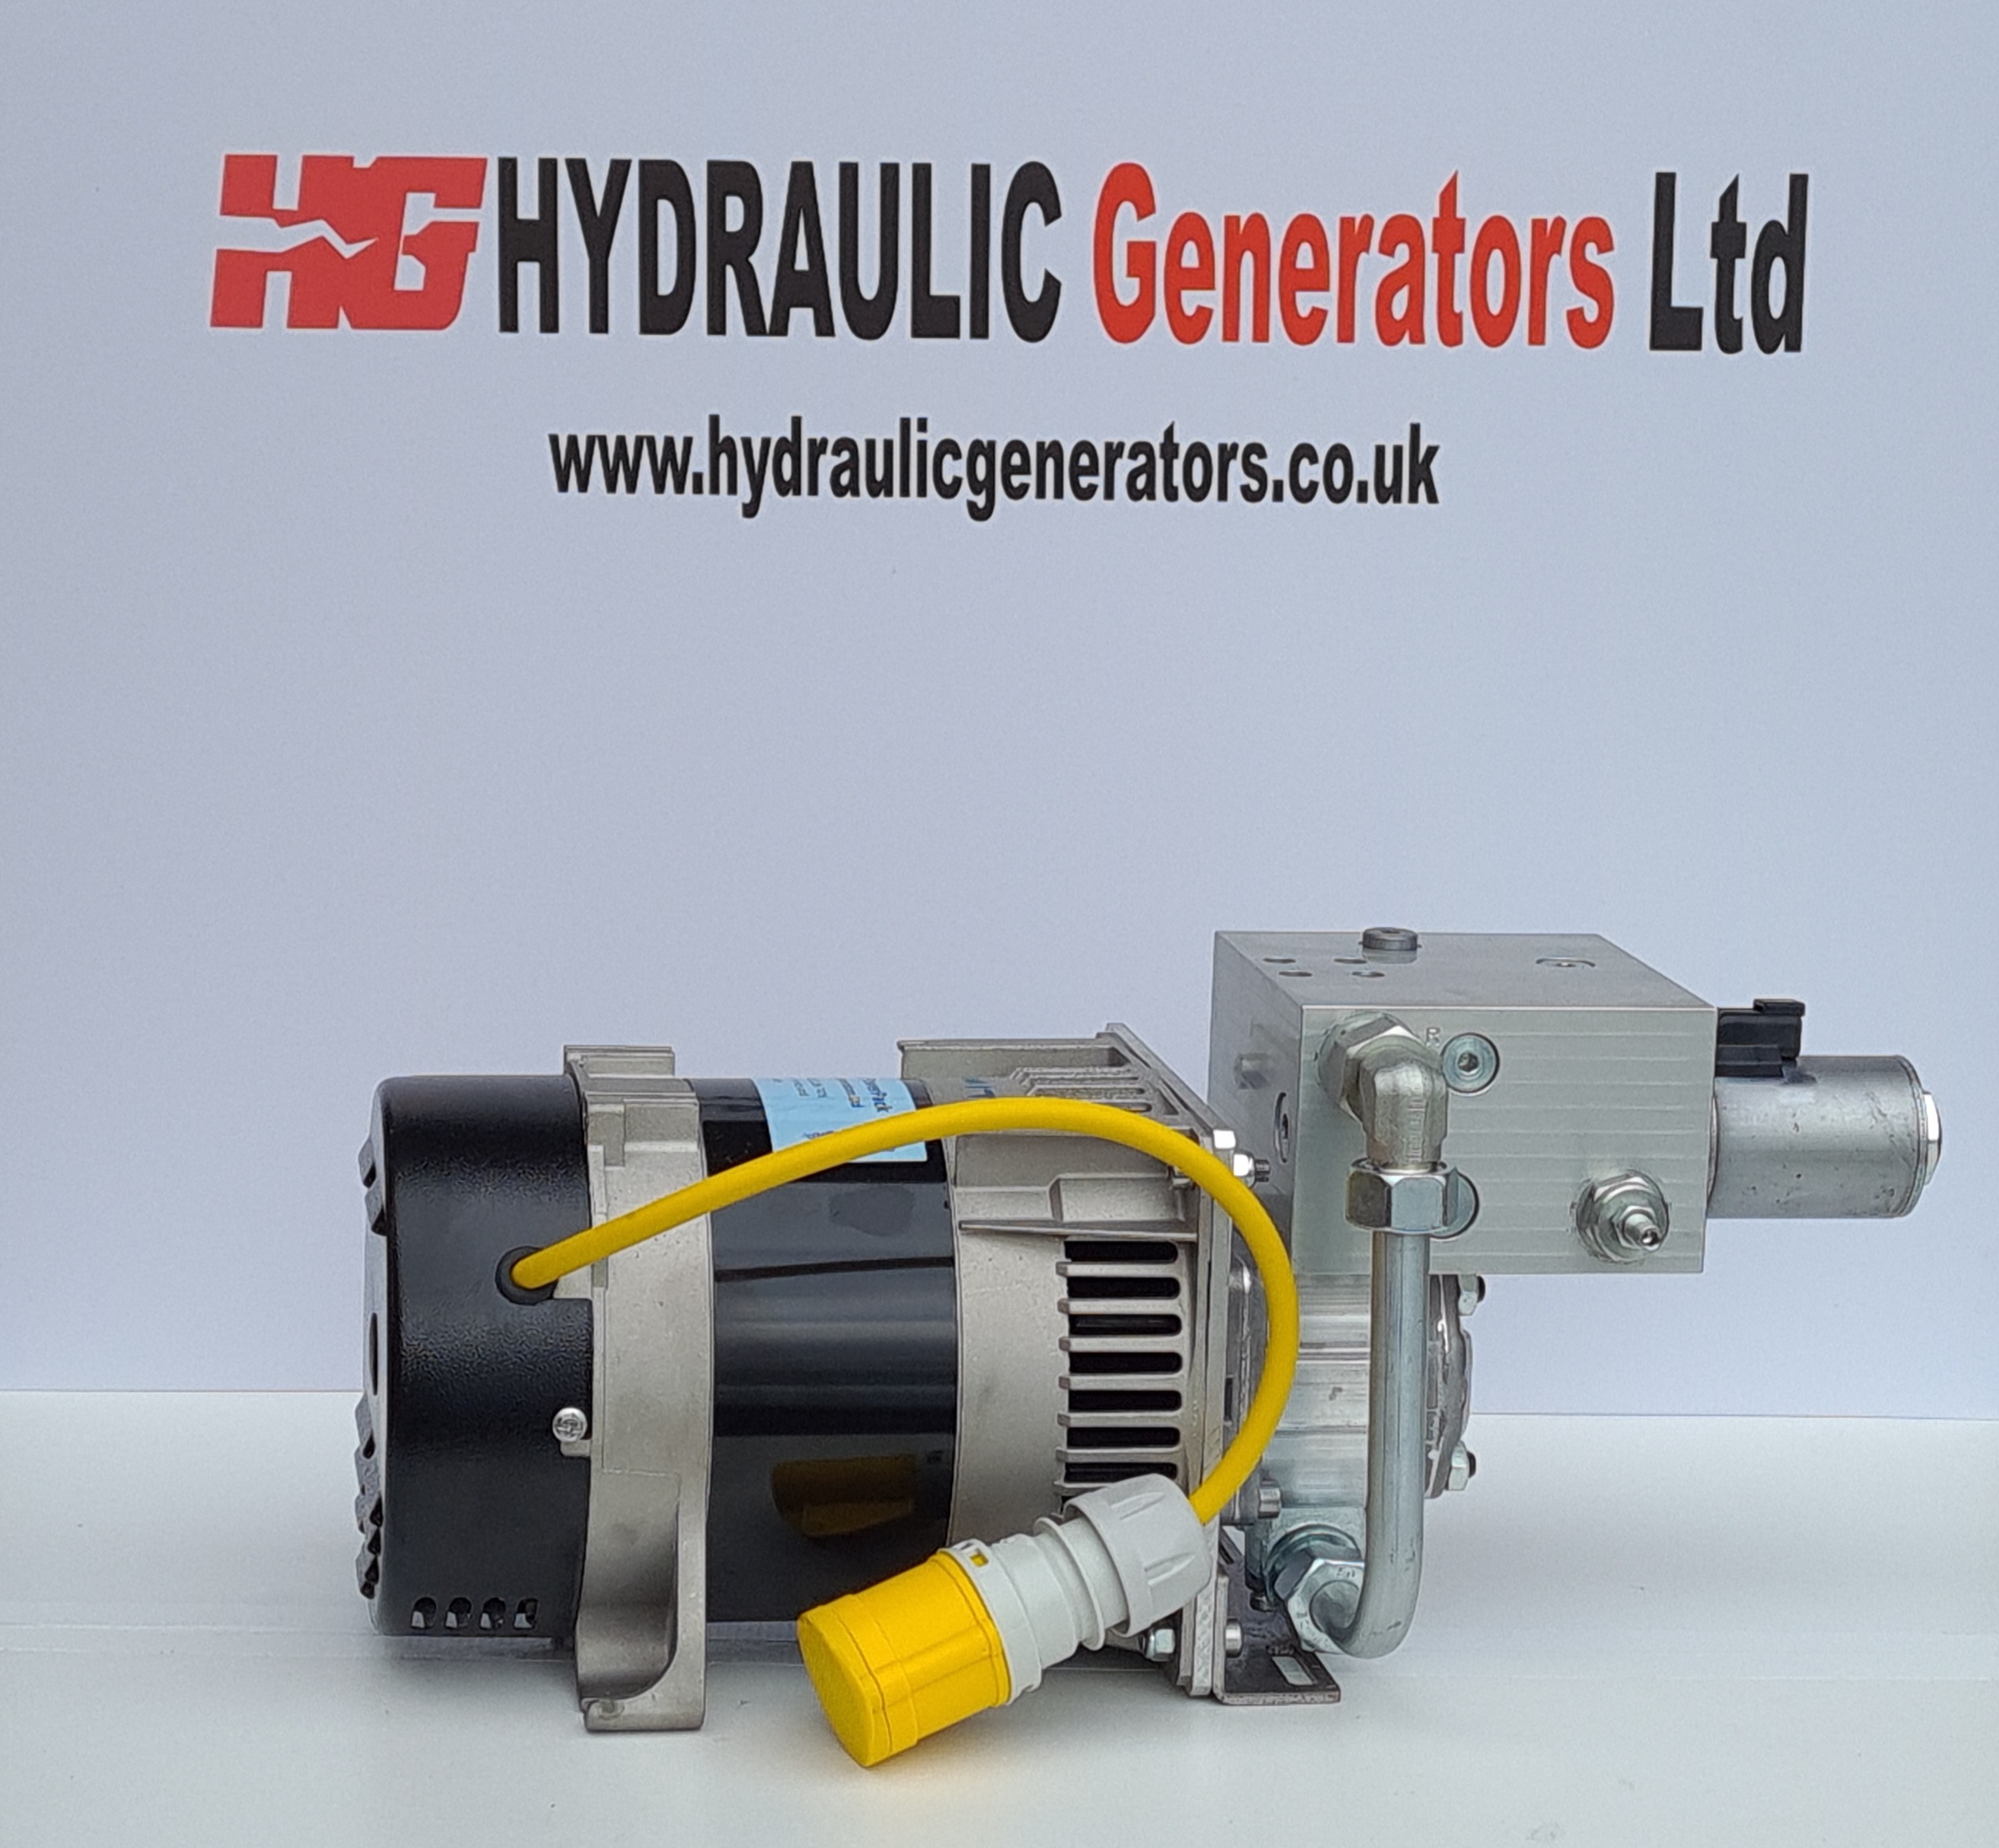 Hydraulic Generator for Access Platforms